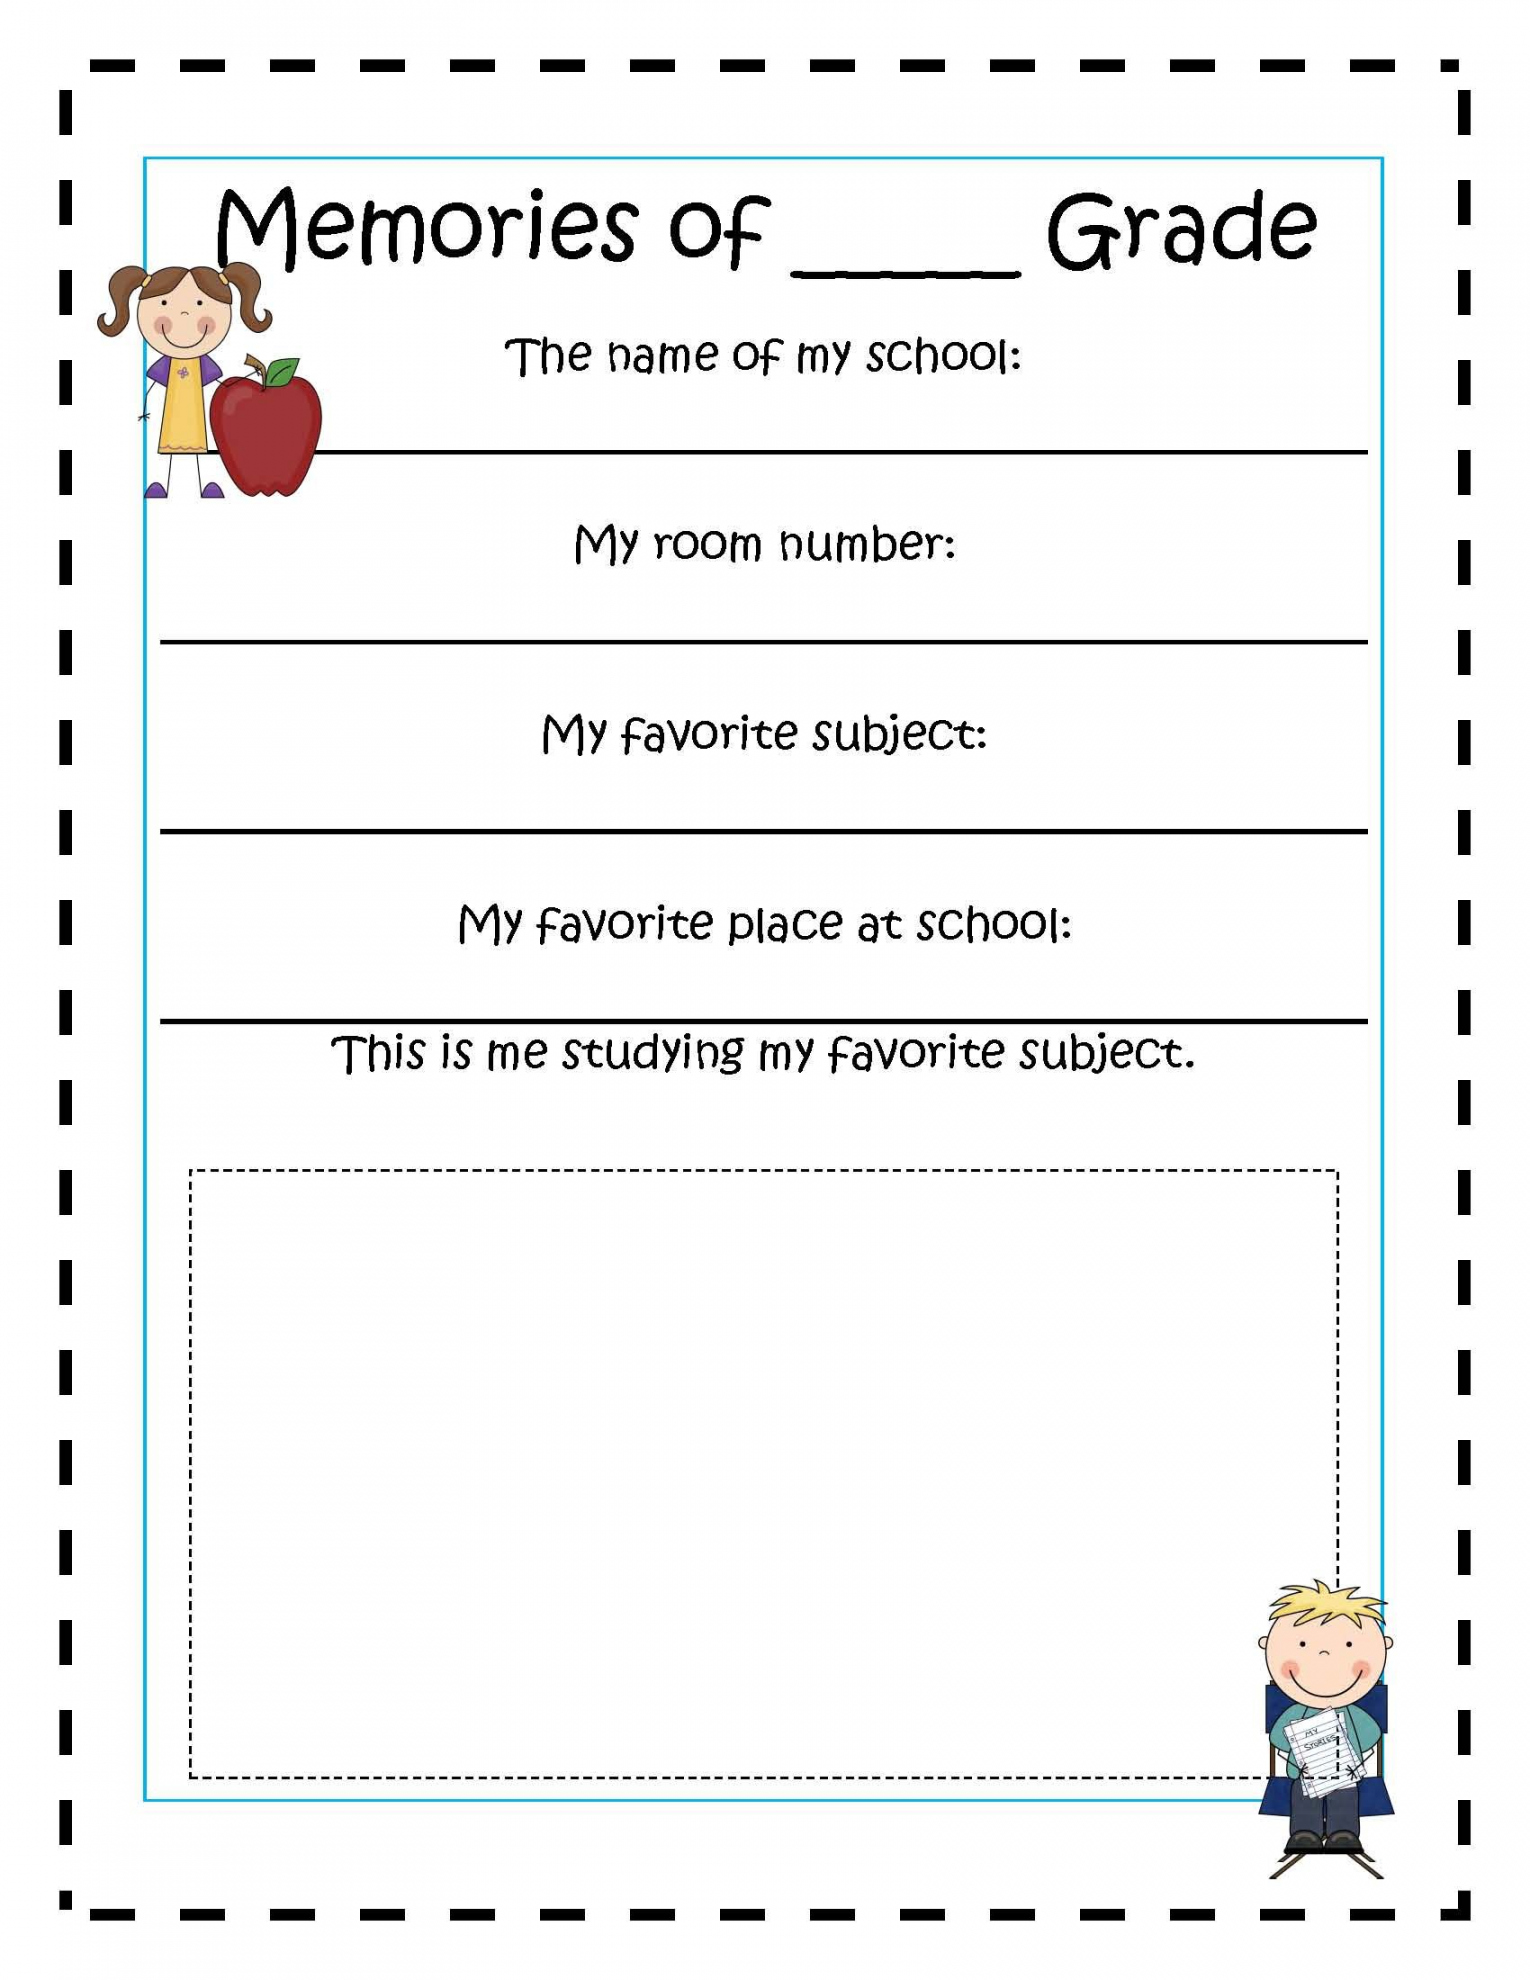 Pin on Crossword puzzle - FREE Printables - Free Printable Memory Book Templates